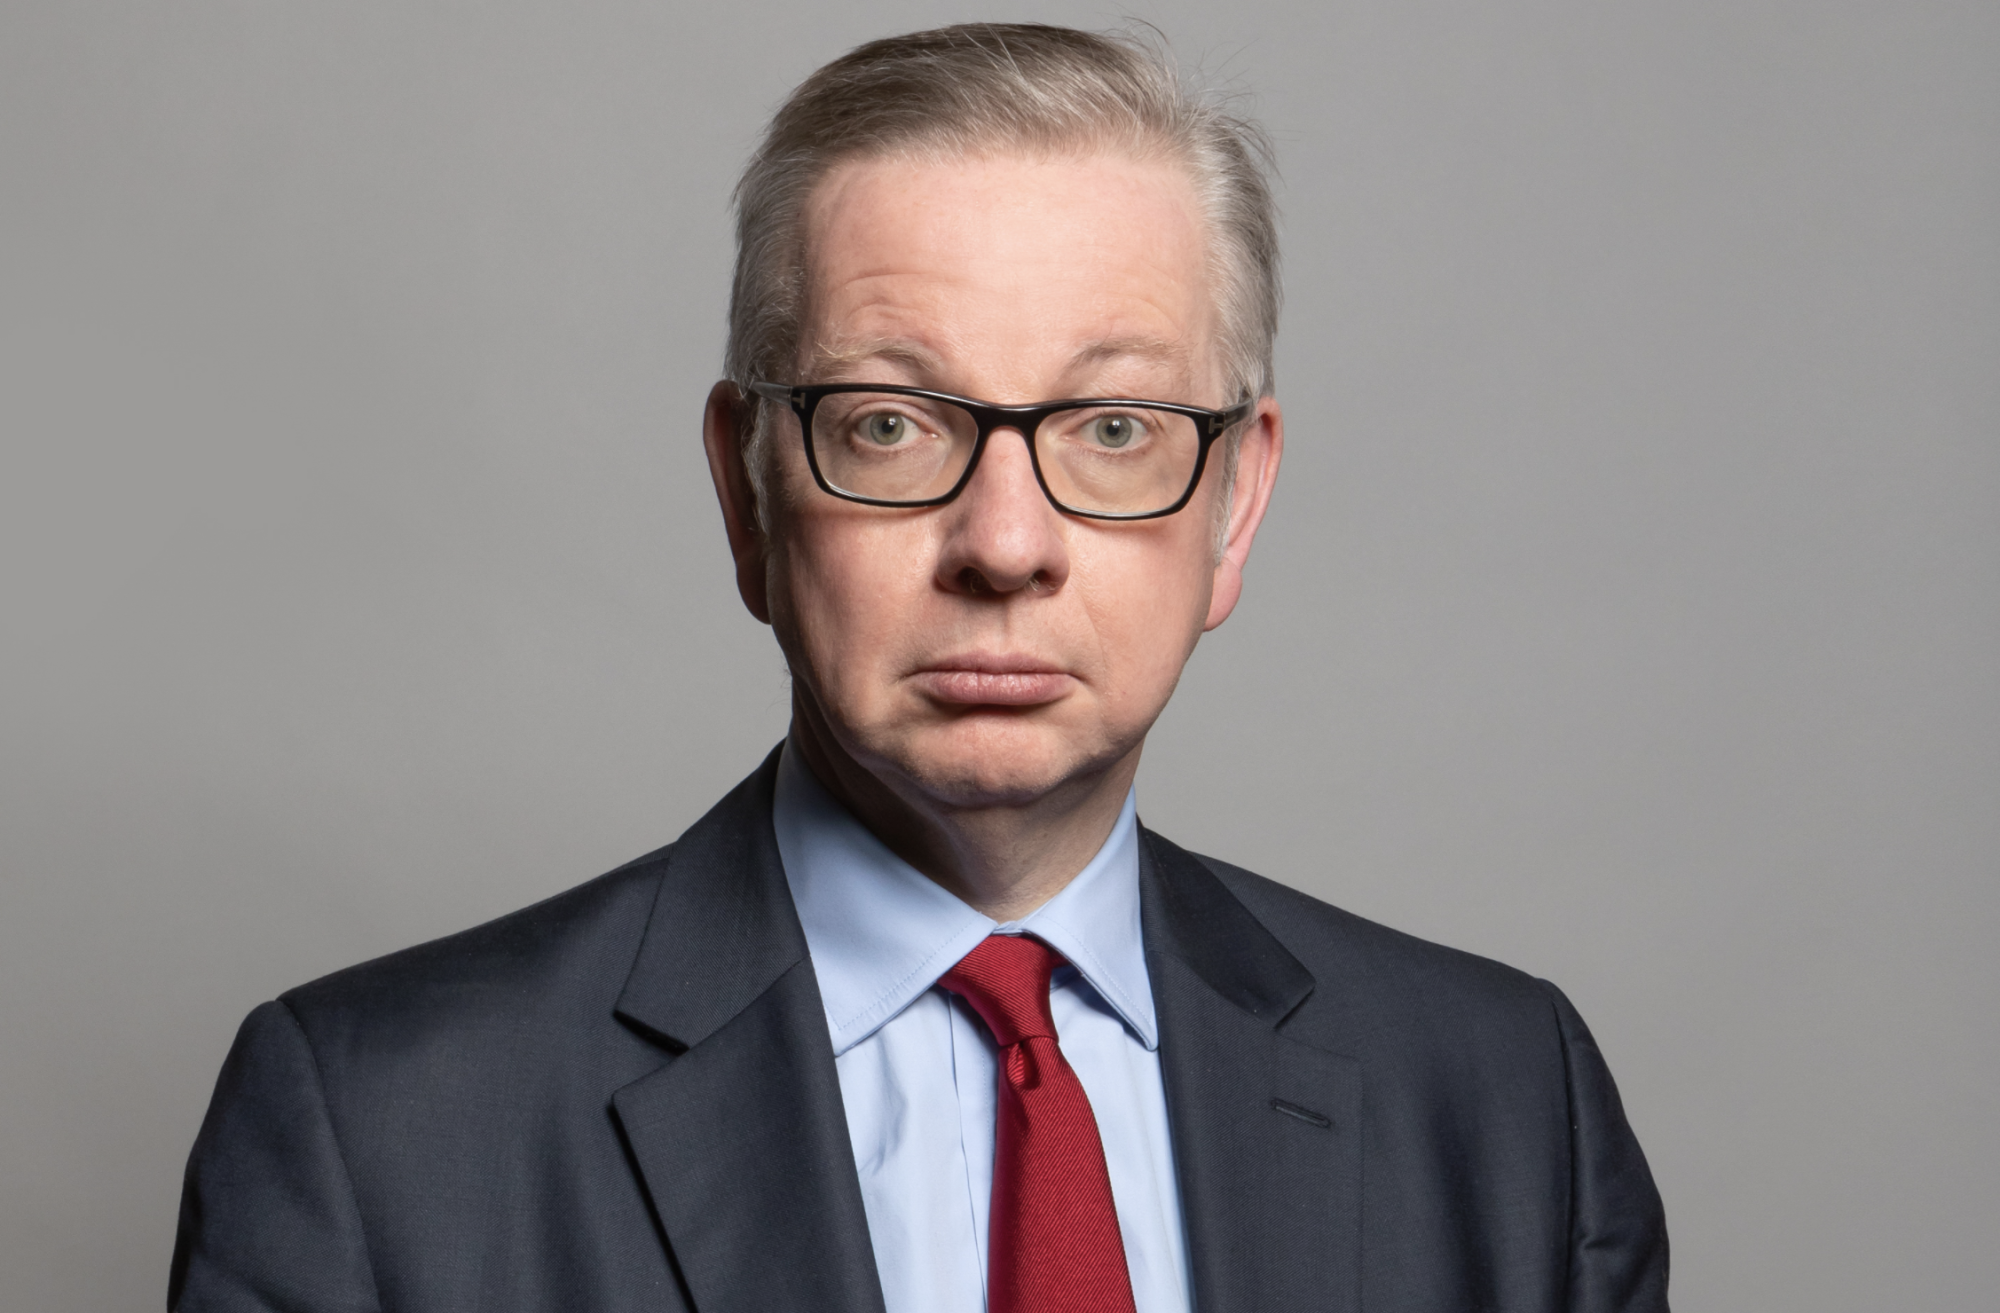 Michael Gove Stuck in Lift at Broadcasting House